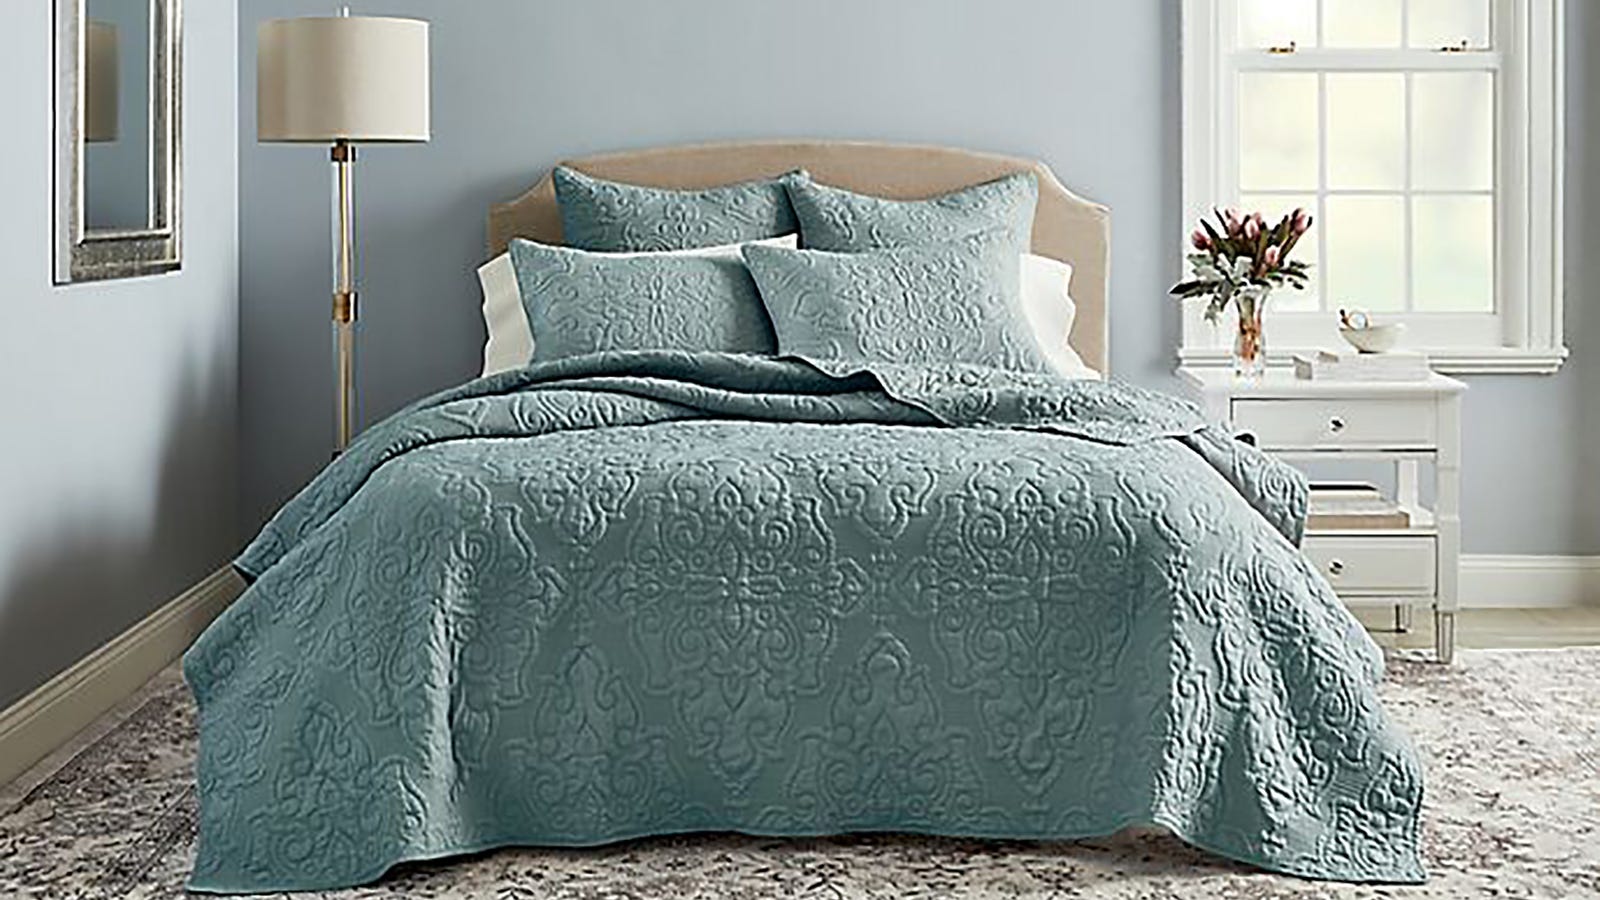 Bed Bath Beyond Get A Comforter For, King Size Down Comforter Bed Bath And Beyond